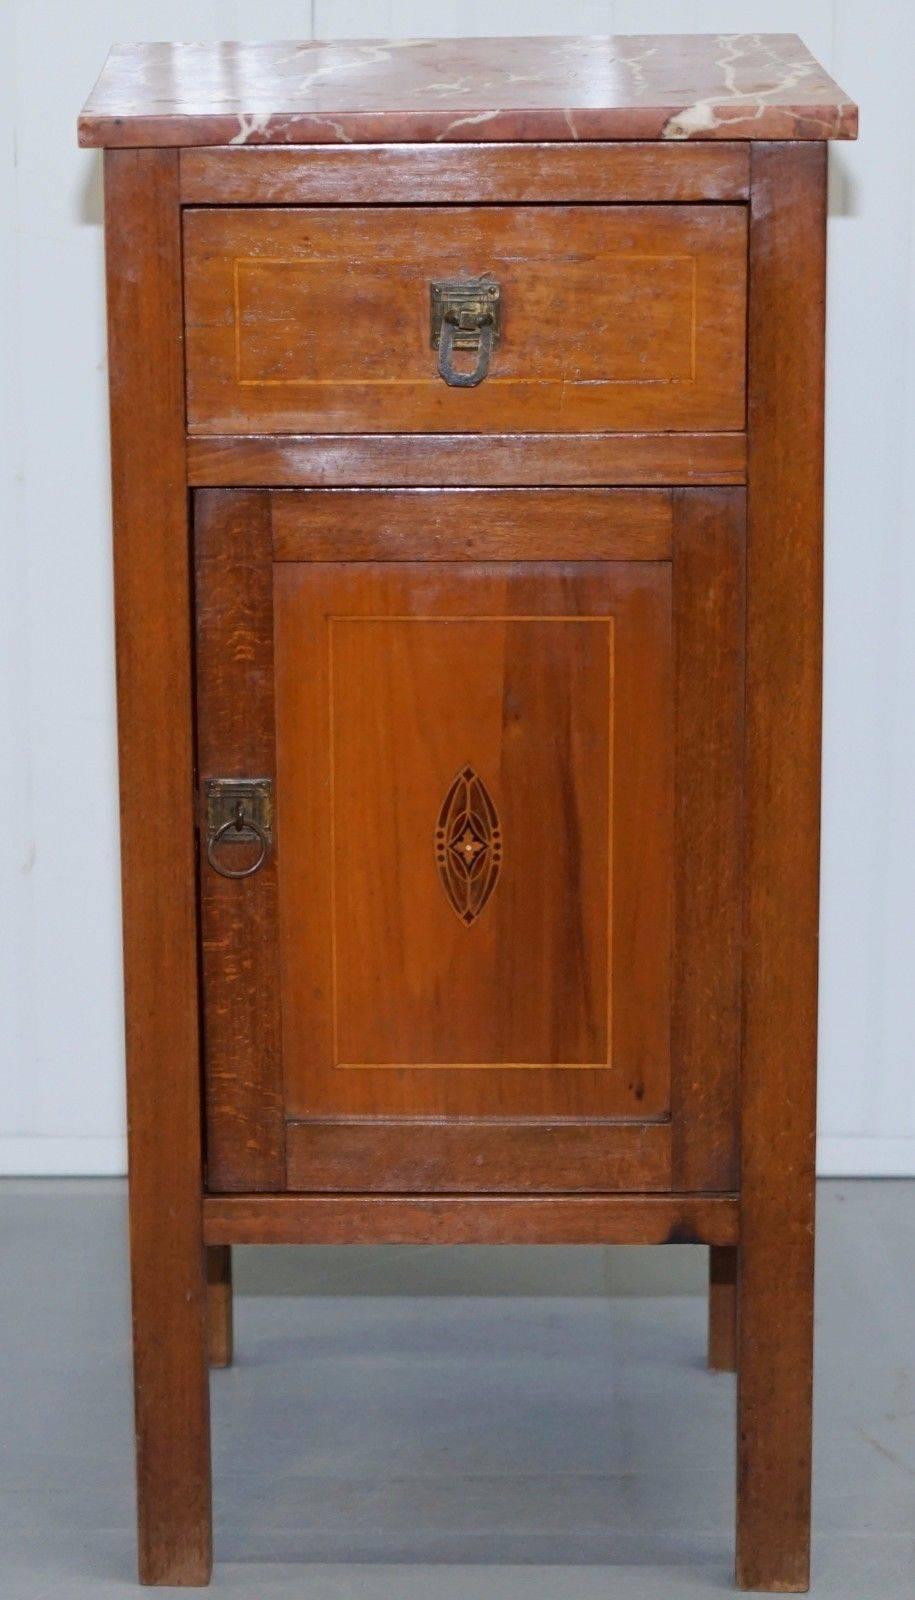 We are delighted to offer for sale this lovely vintage oak side cabinet with marble top

A great functional piece offers lots of storage, ideally suited as a bedside table or lamp table for the living room

The marble-top is solid and free-from